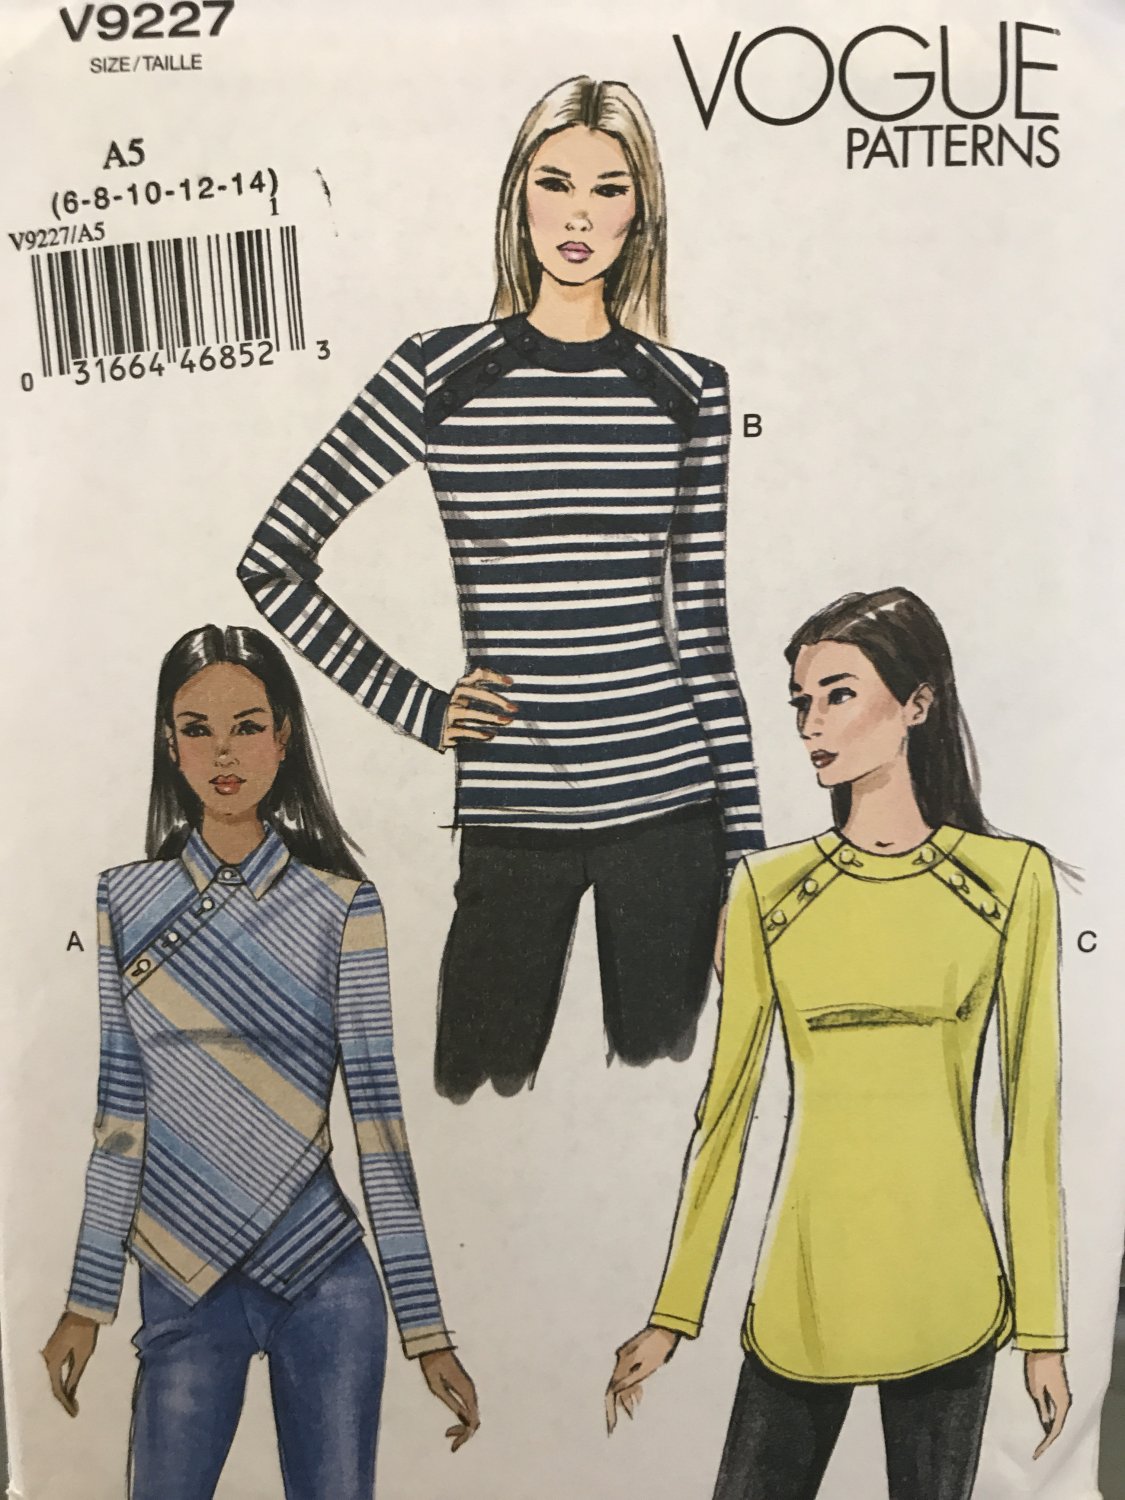 Vogue 9227 Misses' Tops Sewing Pattern  Size 6-14